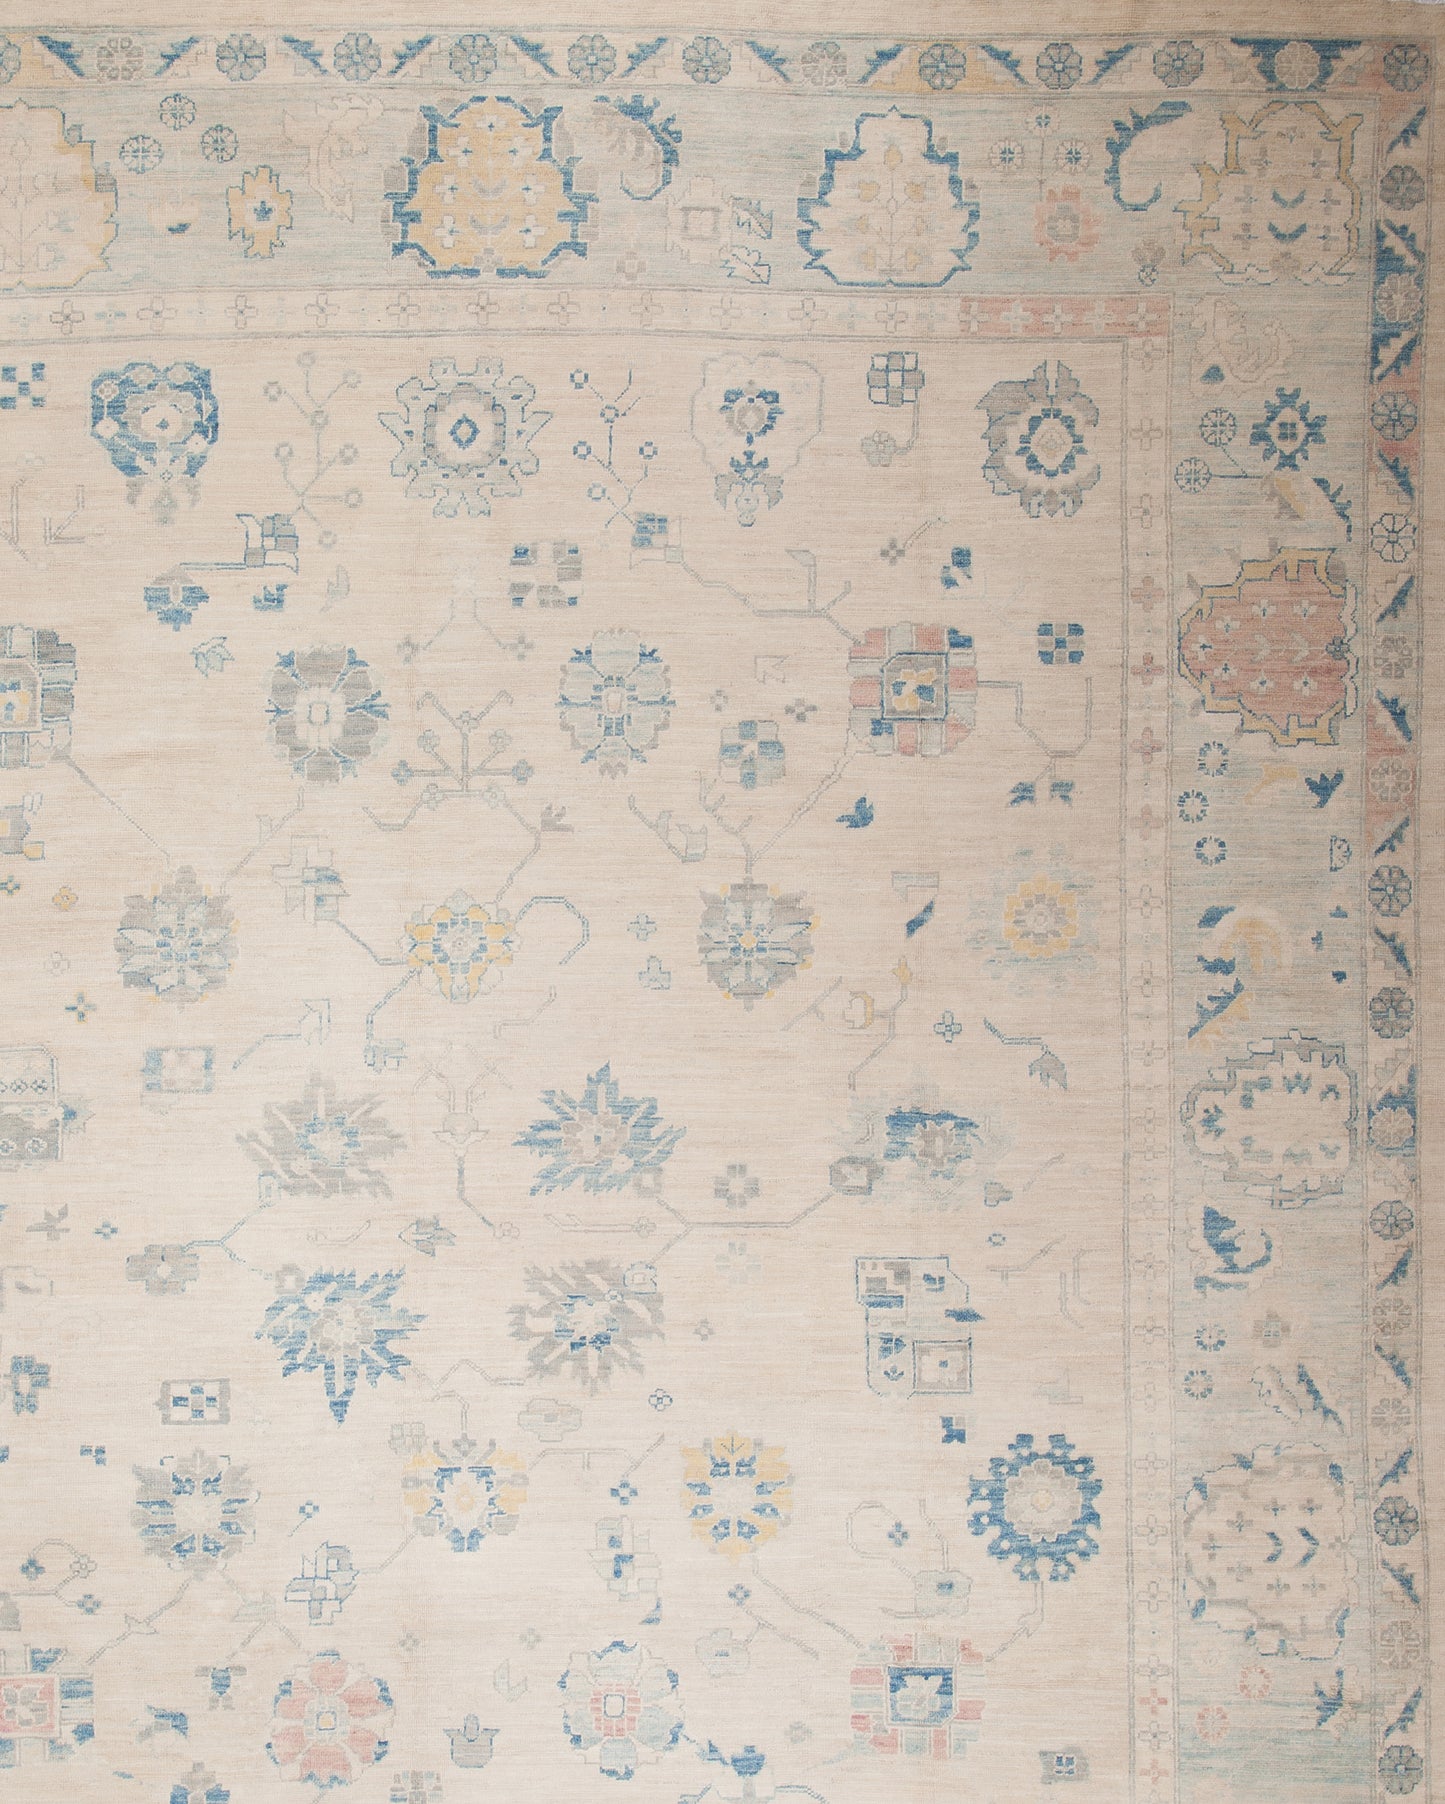 on the top right corner it is perceived how every frame contains its own flower pattern design.